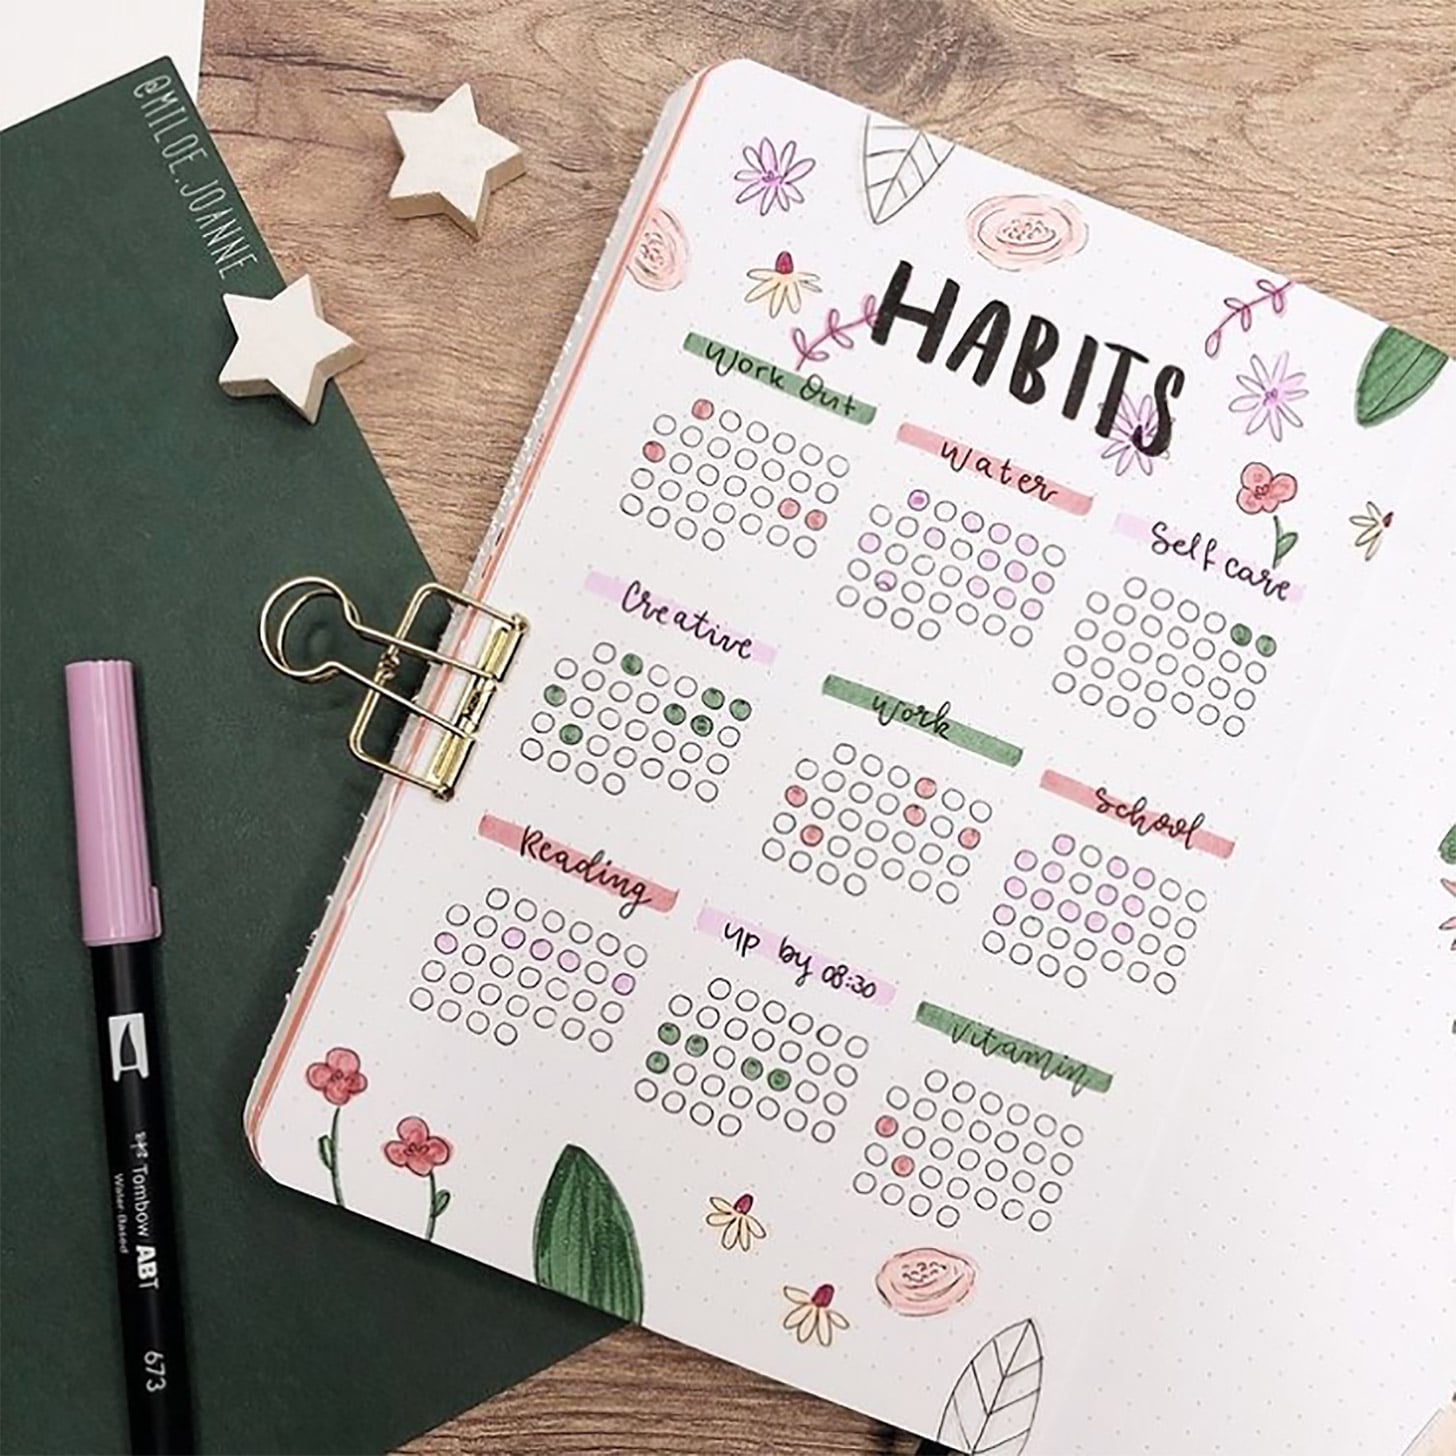 paper-party-supplies-calendars-planners-general-habit-tracker-paper